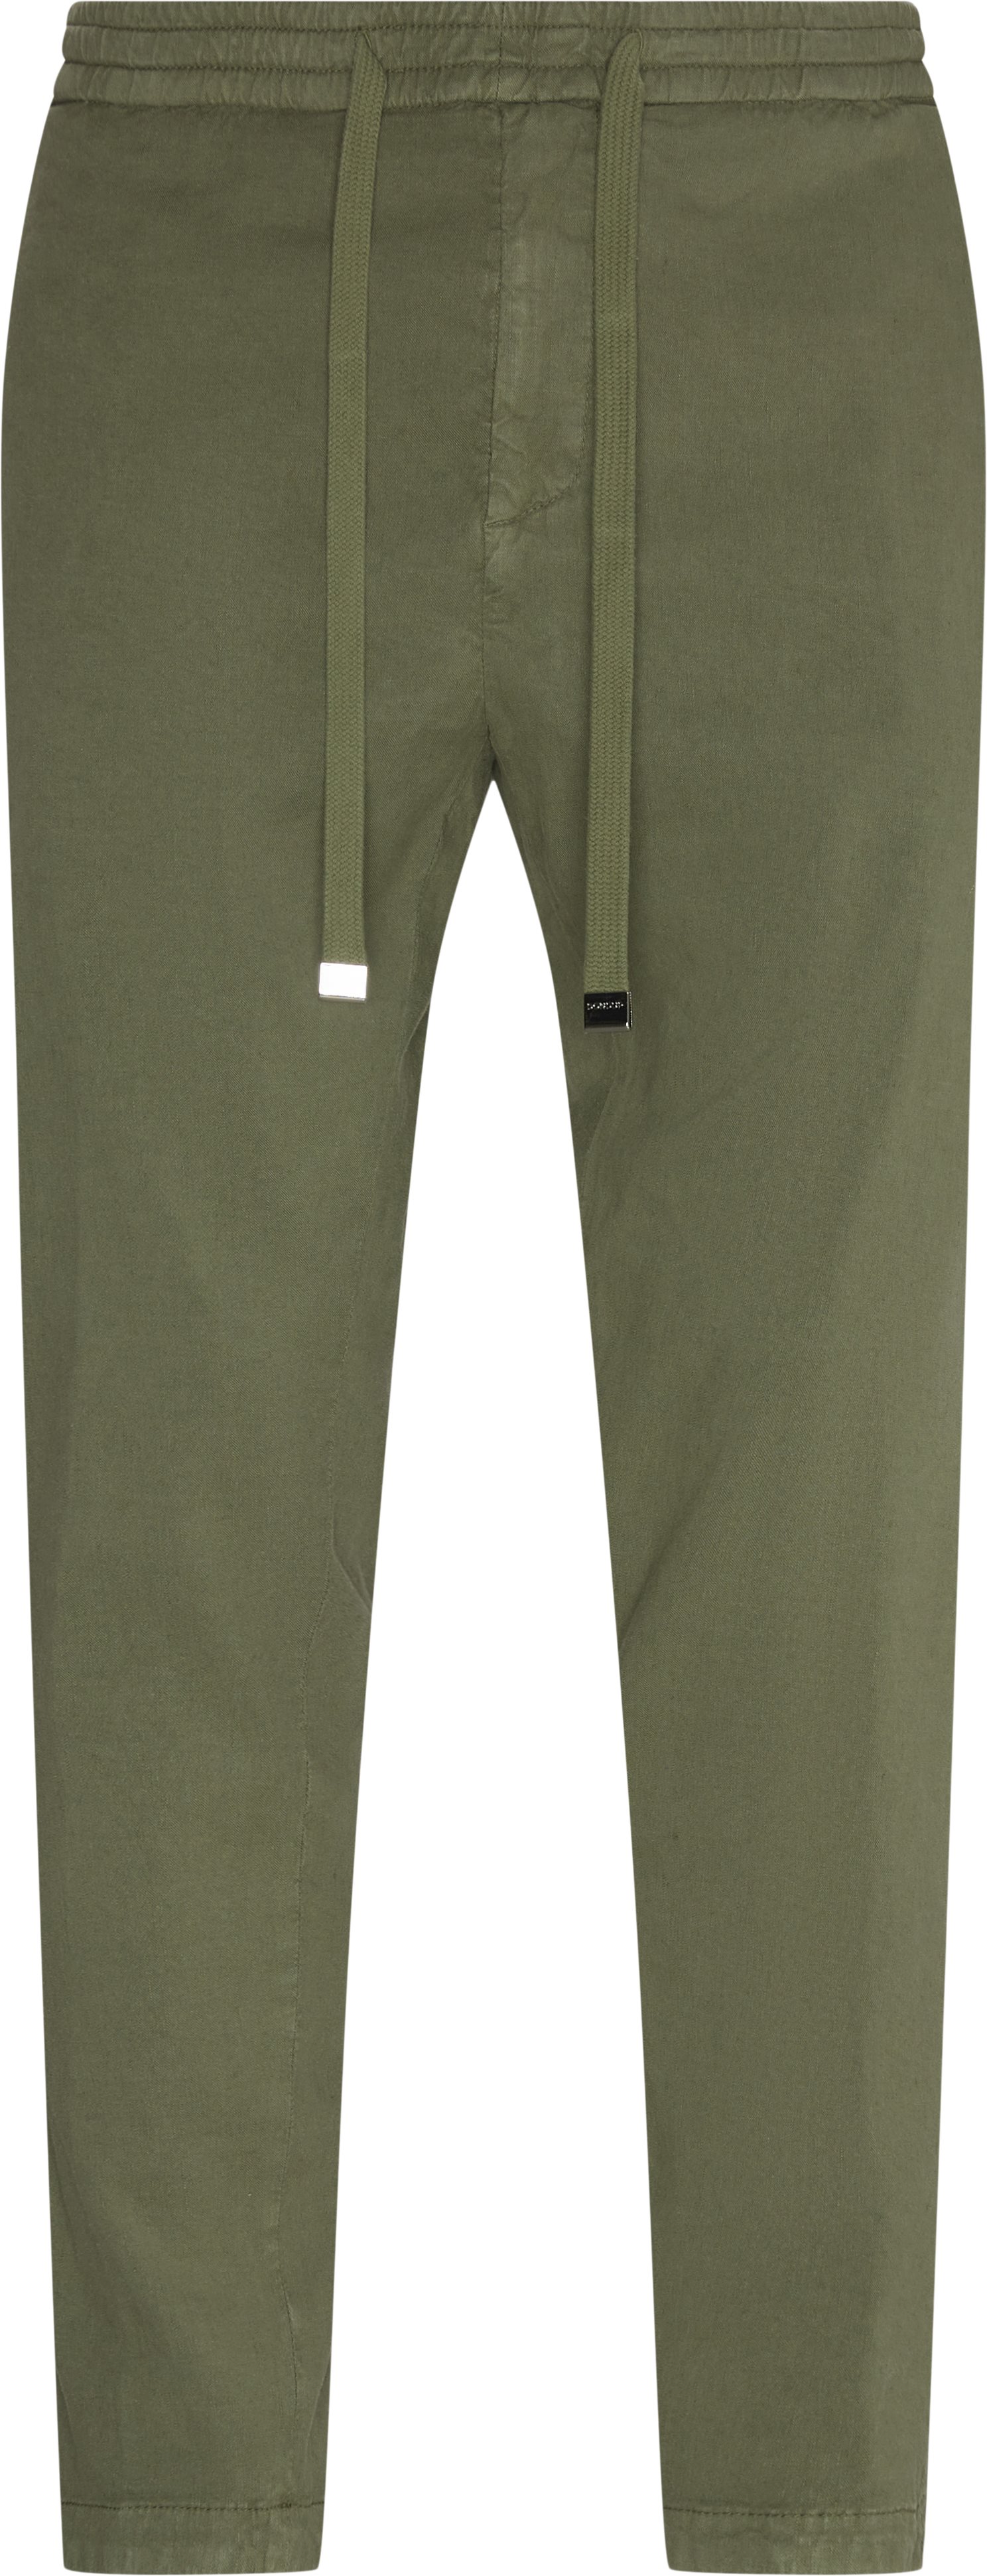 Trousers - Loose fit - Army